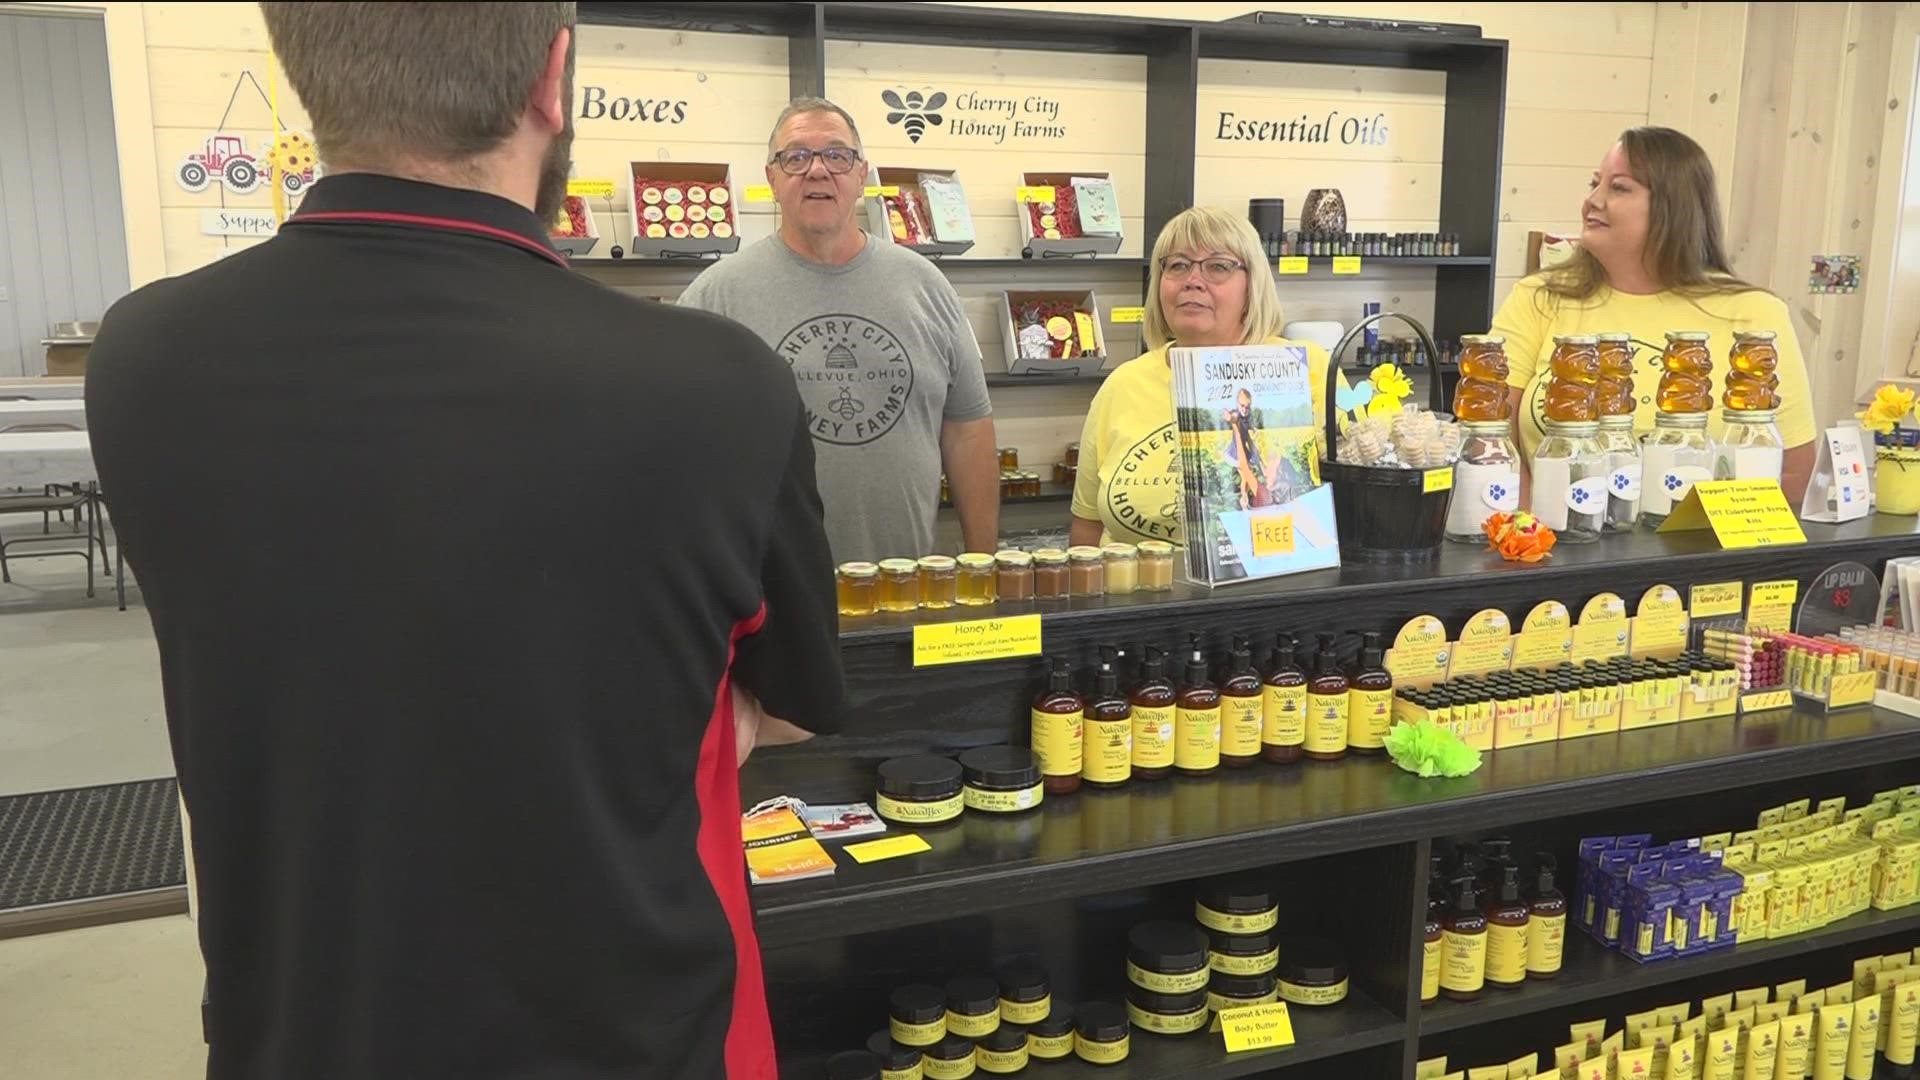 Not only can customers buy local honey, they can find the supplies they need to start their own beekeeping hobby.